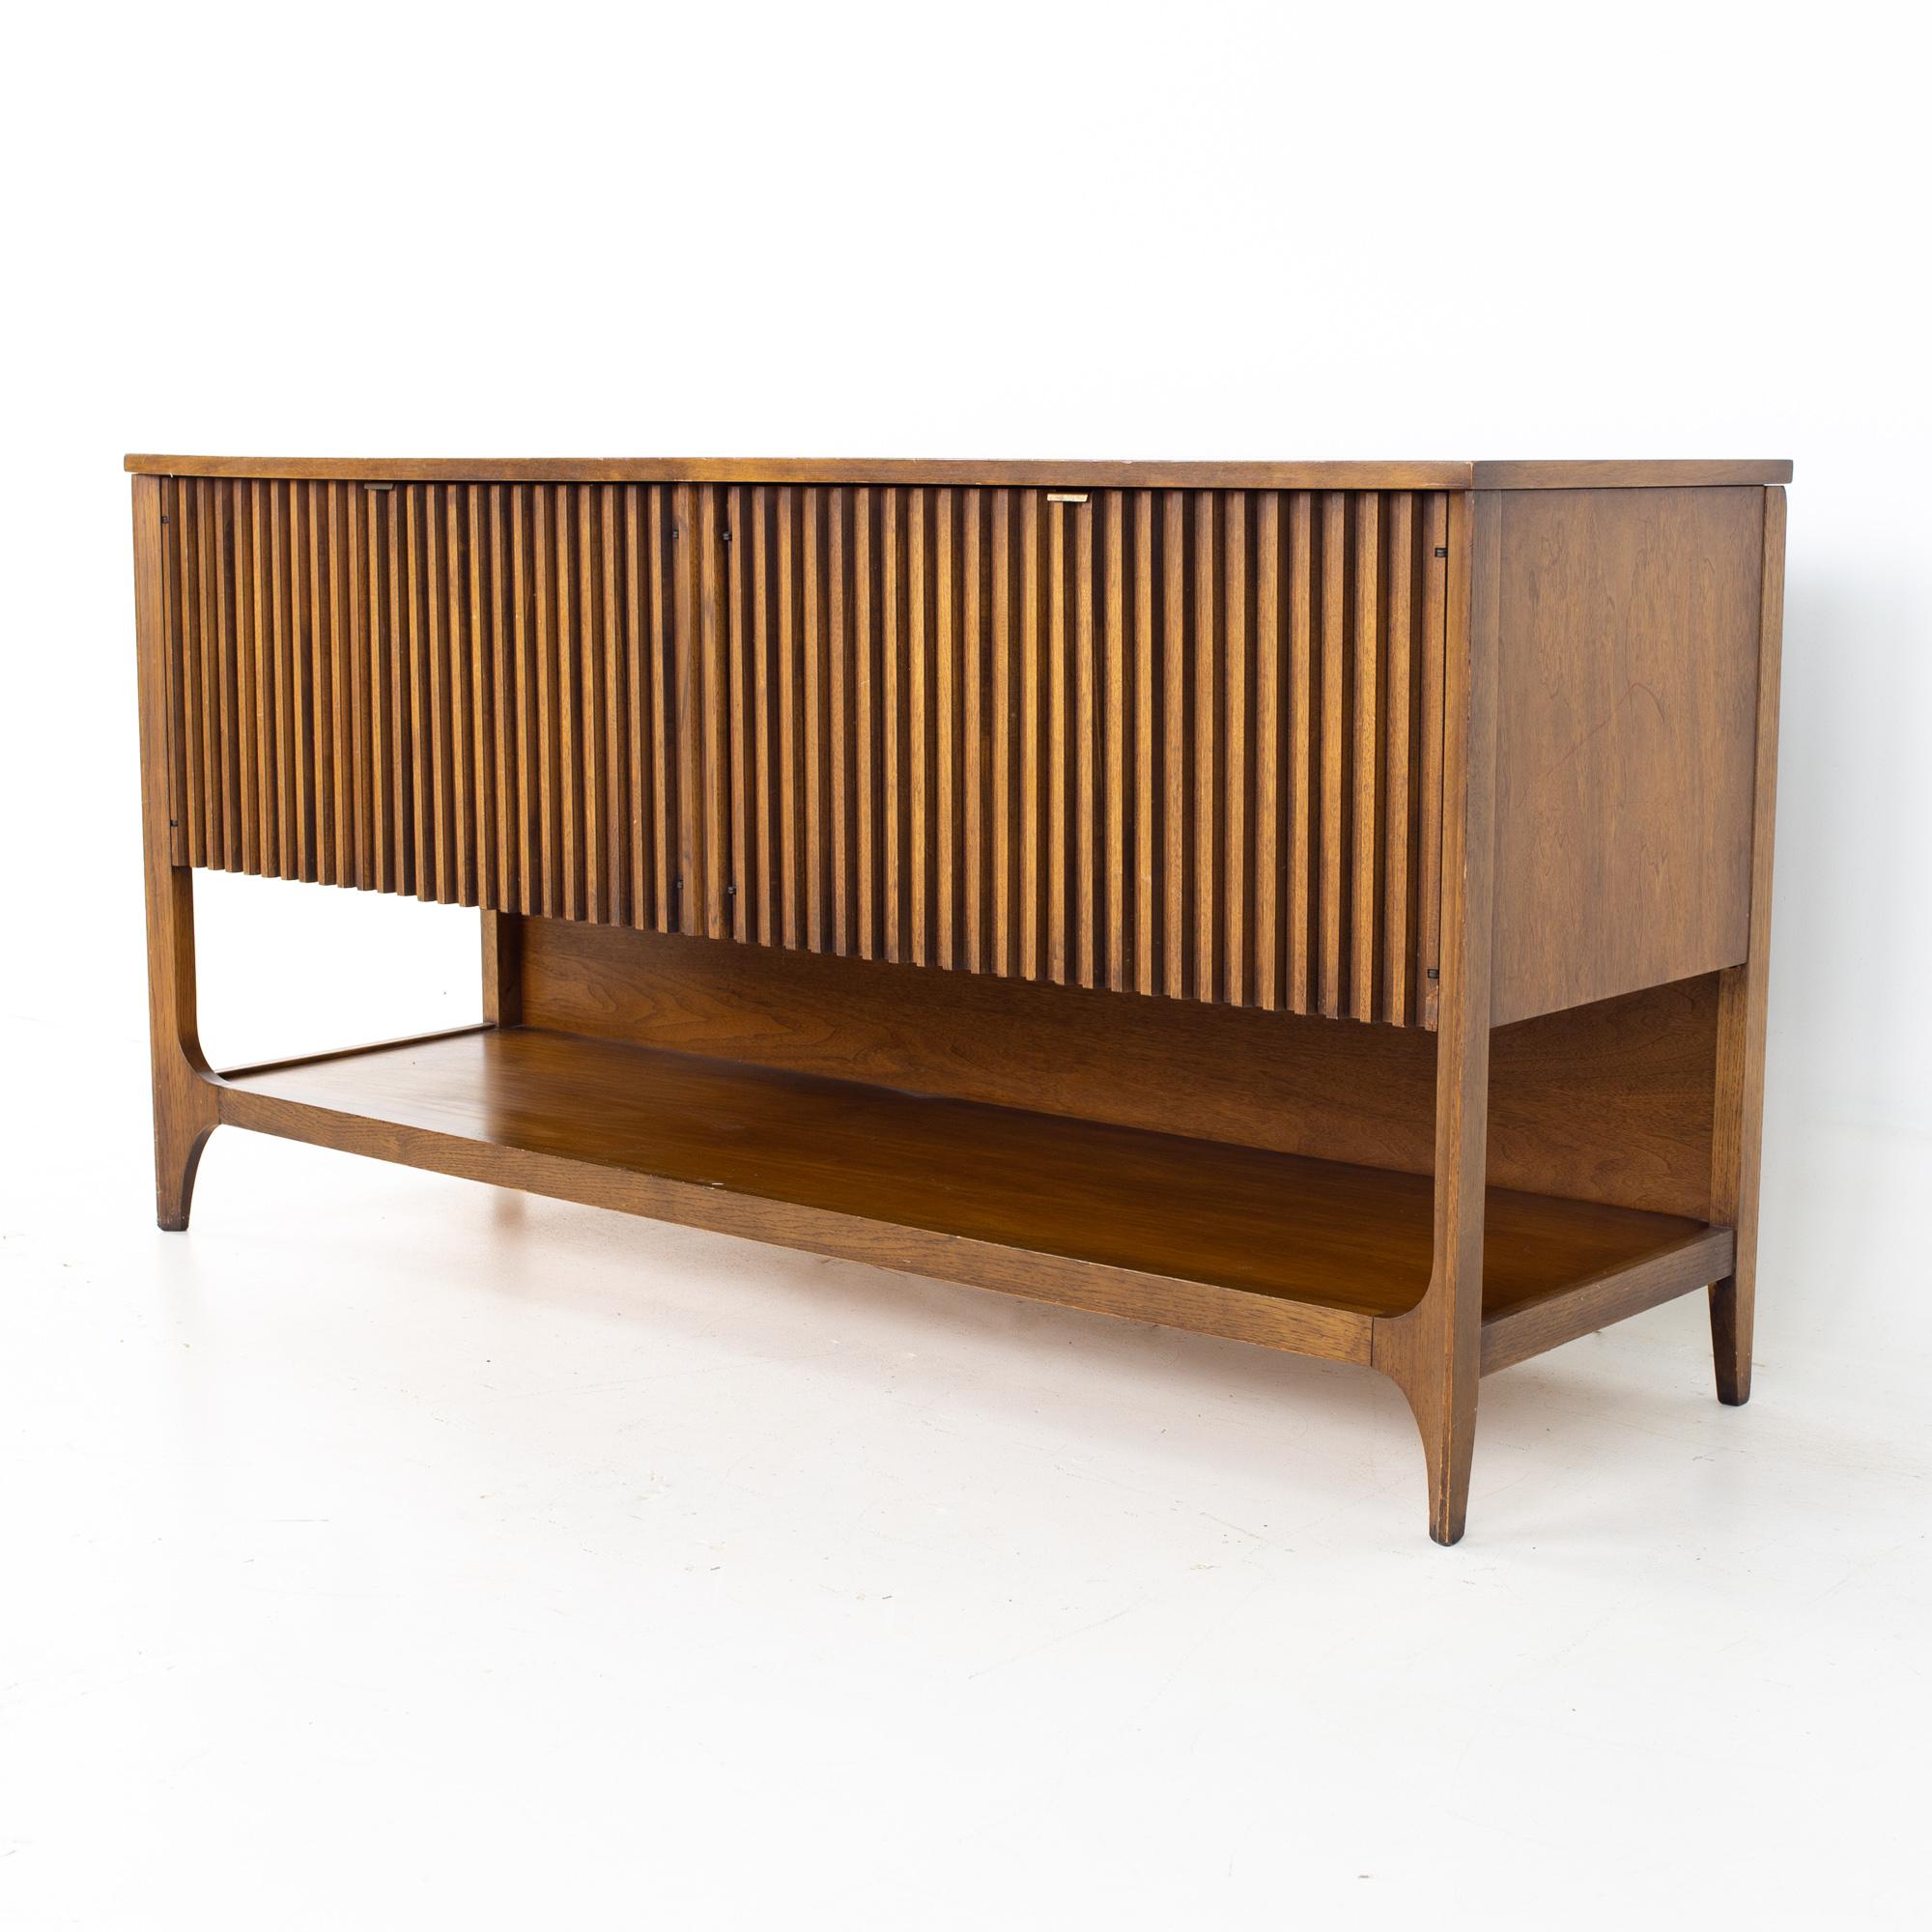 Broyhill Brasilia mid century walnut louvered credenza
Credenza measures: 60 wide x 19 deep x 24.5 inches high 

All pieces of furniture can be had in what we call restored vintage condition. That means the piece is restored upon purchase so it’s